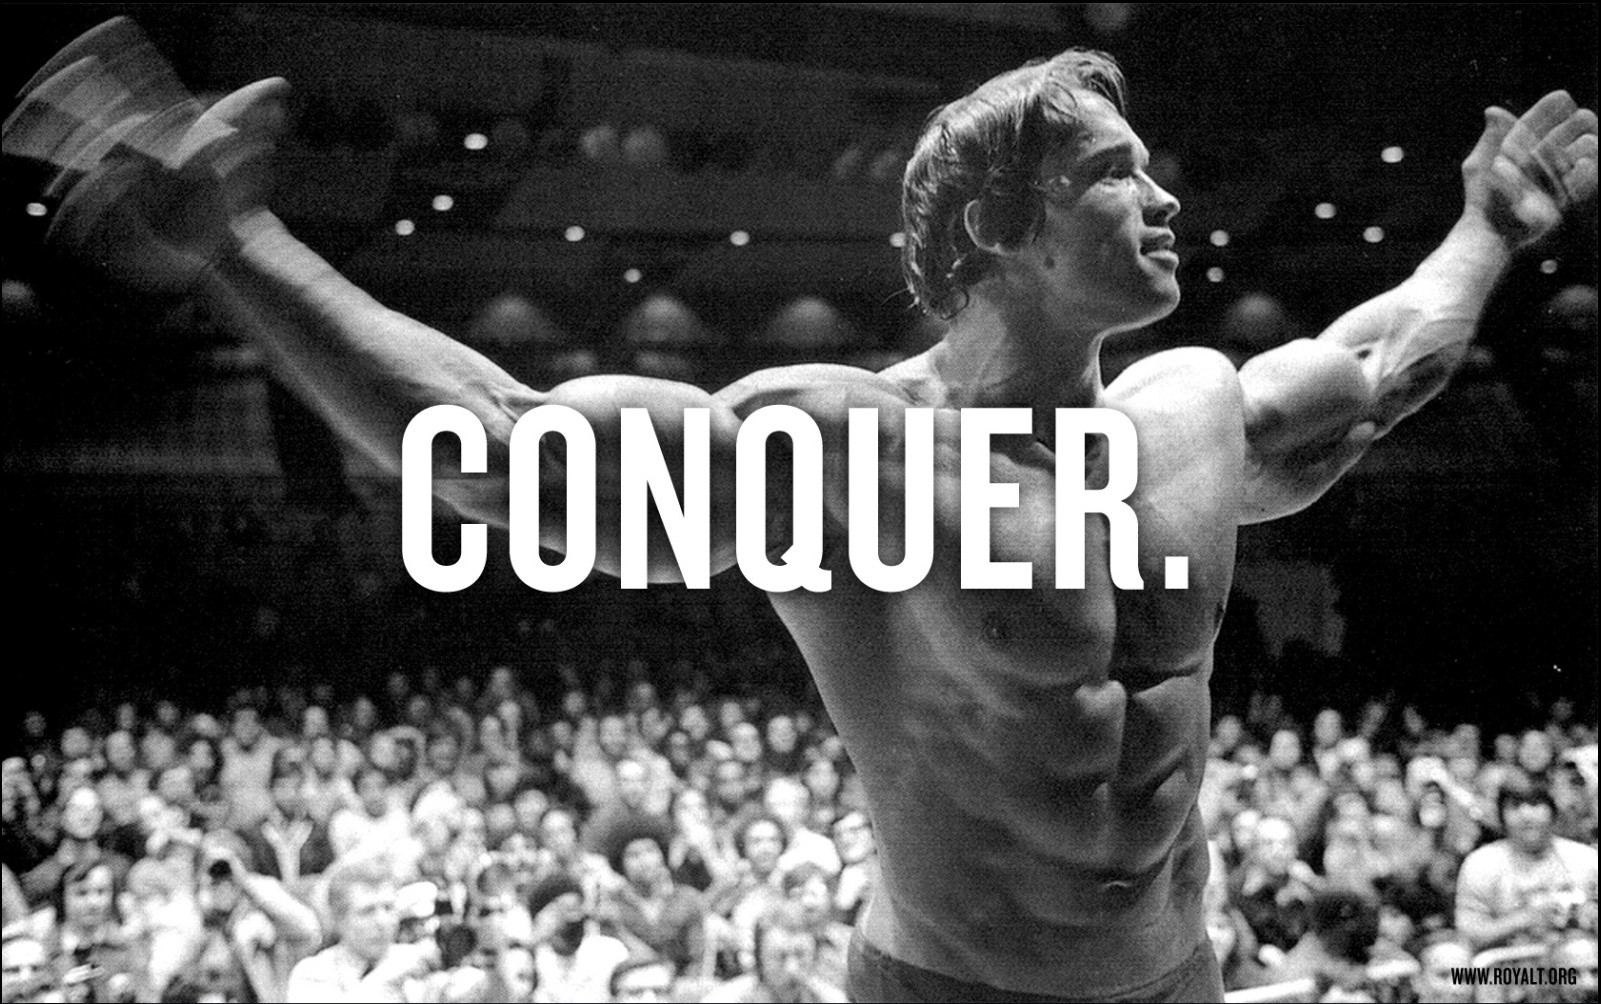 Arnold Schwarzenegger Conquer Image Saw A Classmate Use It As